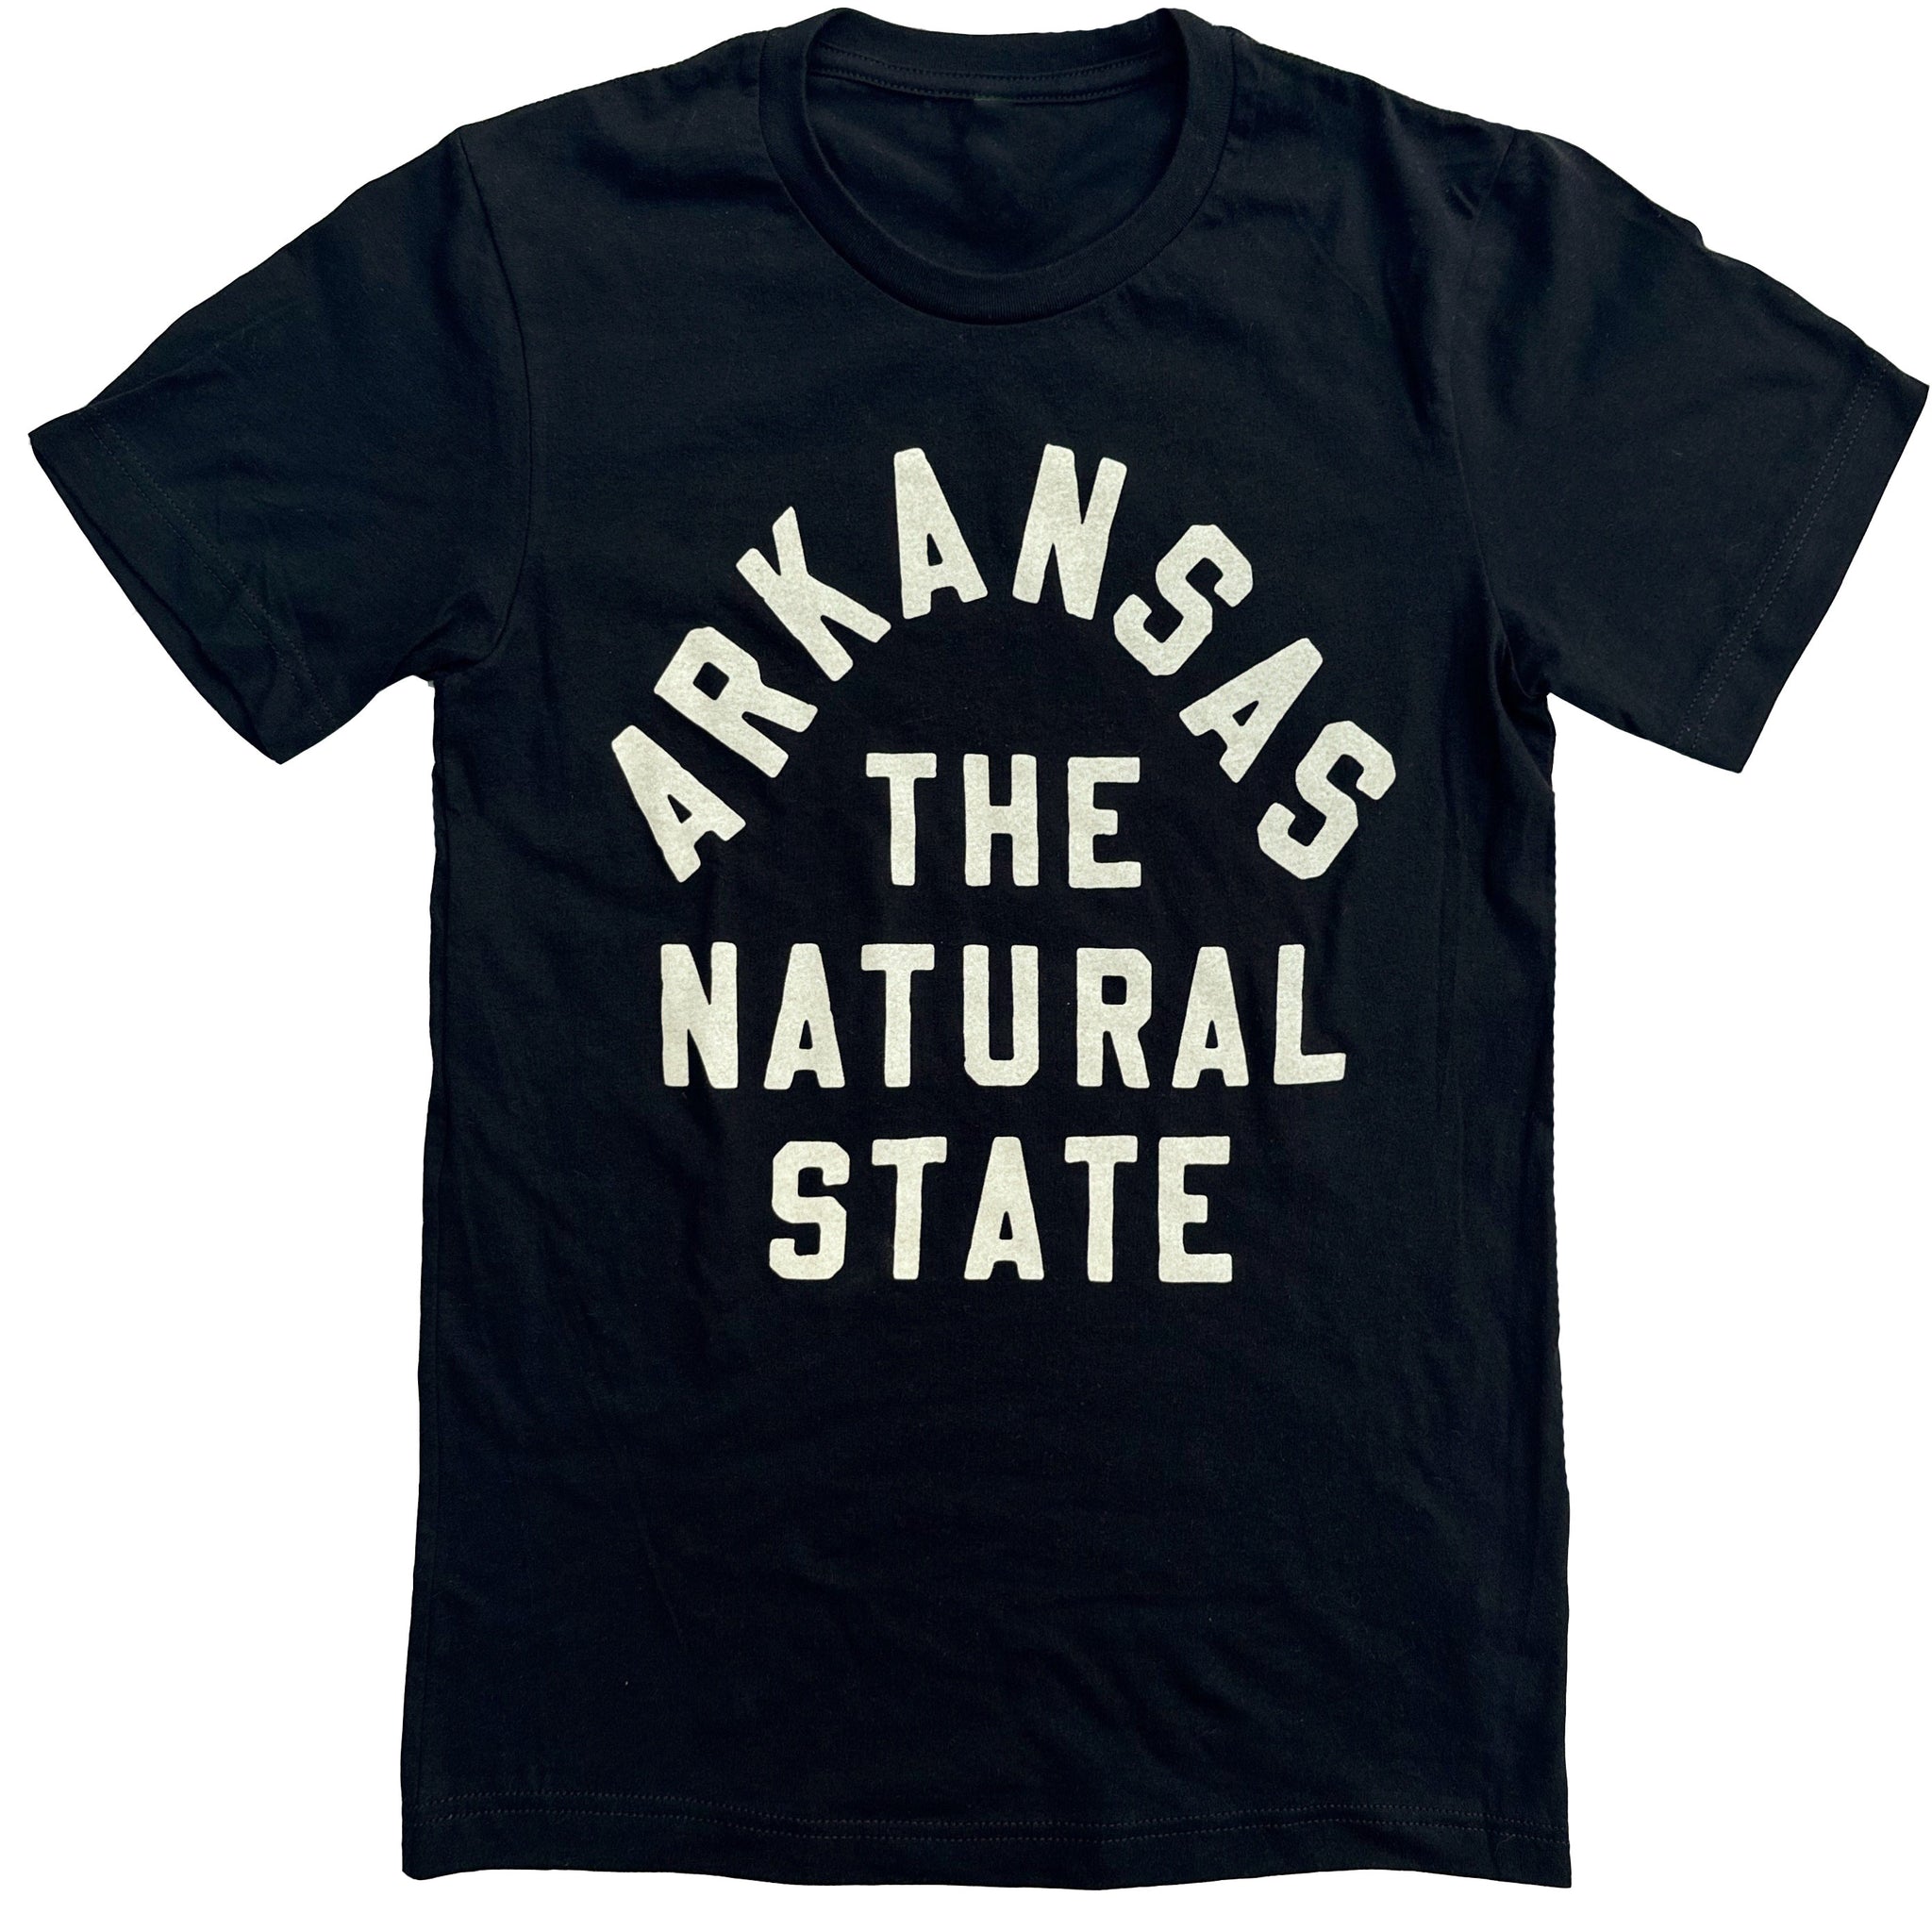 Arkansas the Natural State Tee in Black